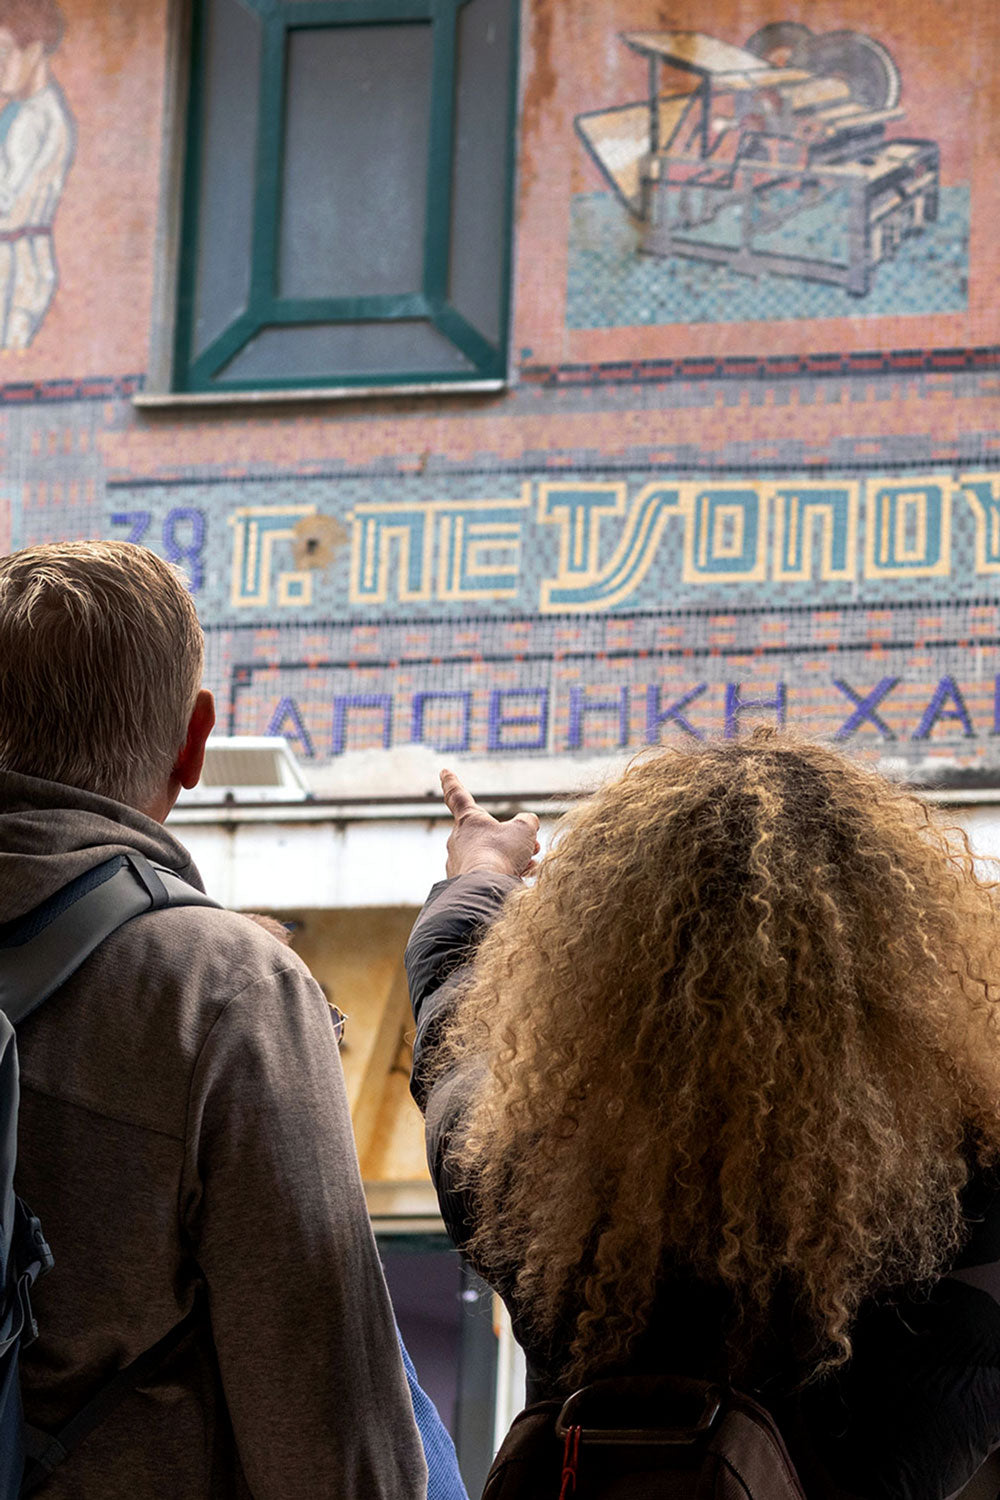 ATHENS TYPE: Reading into Fading Typographic Landscapes